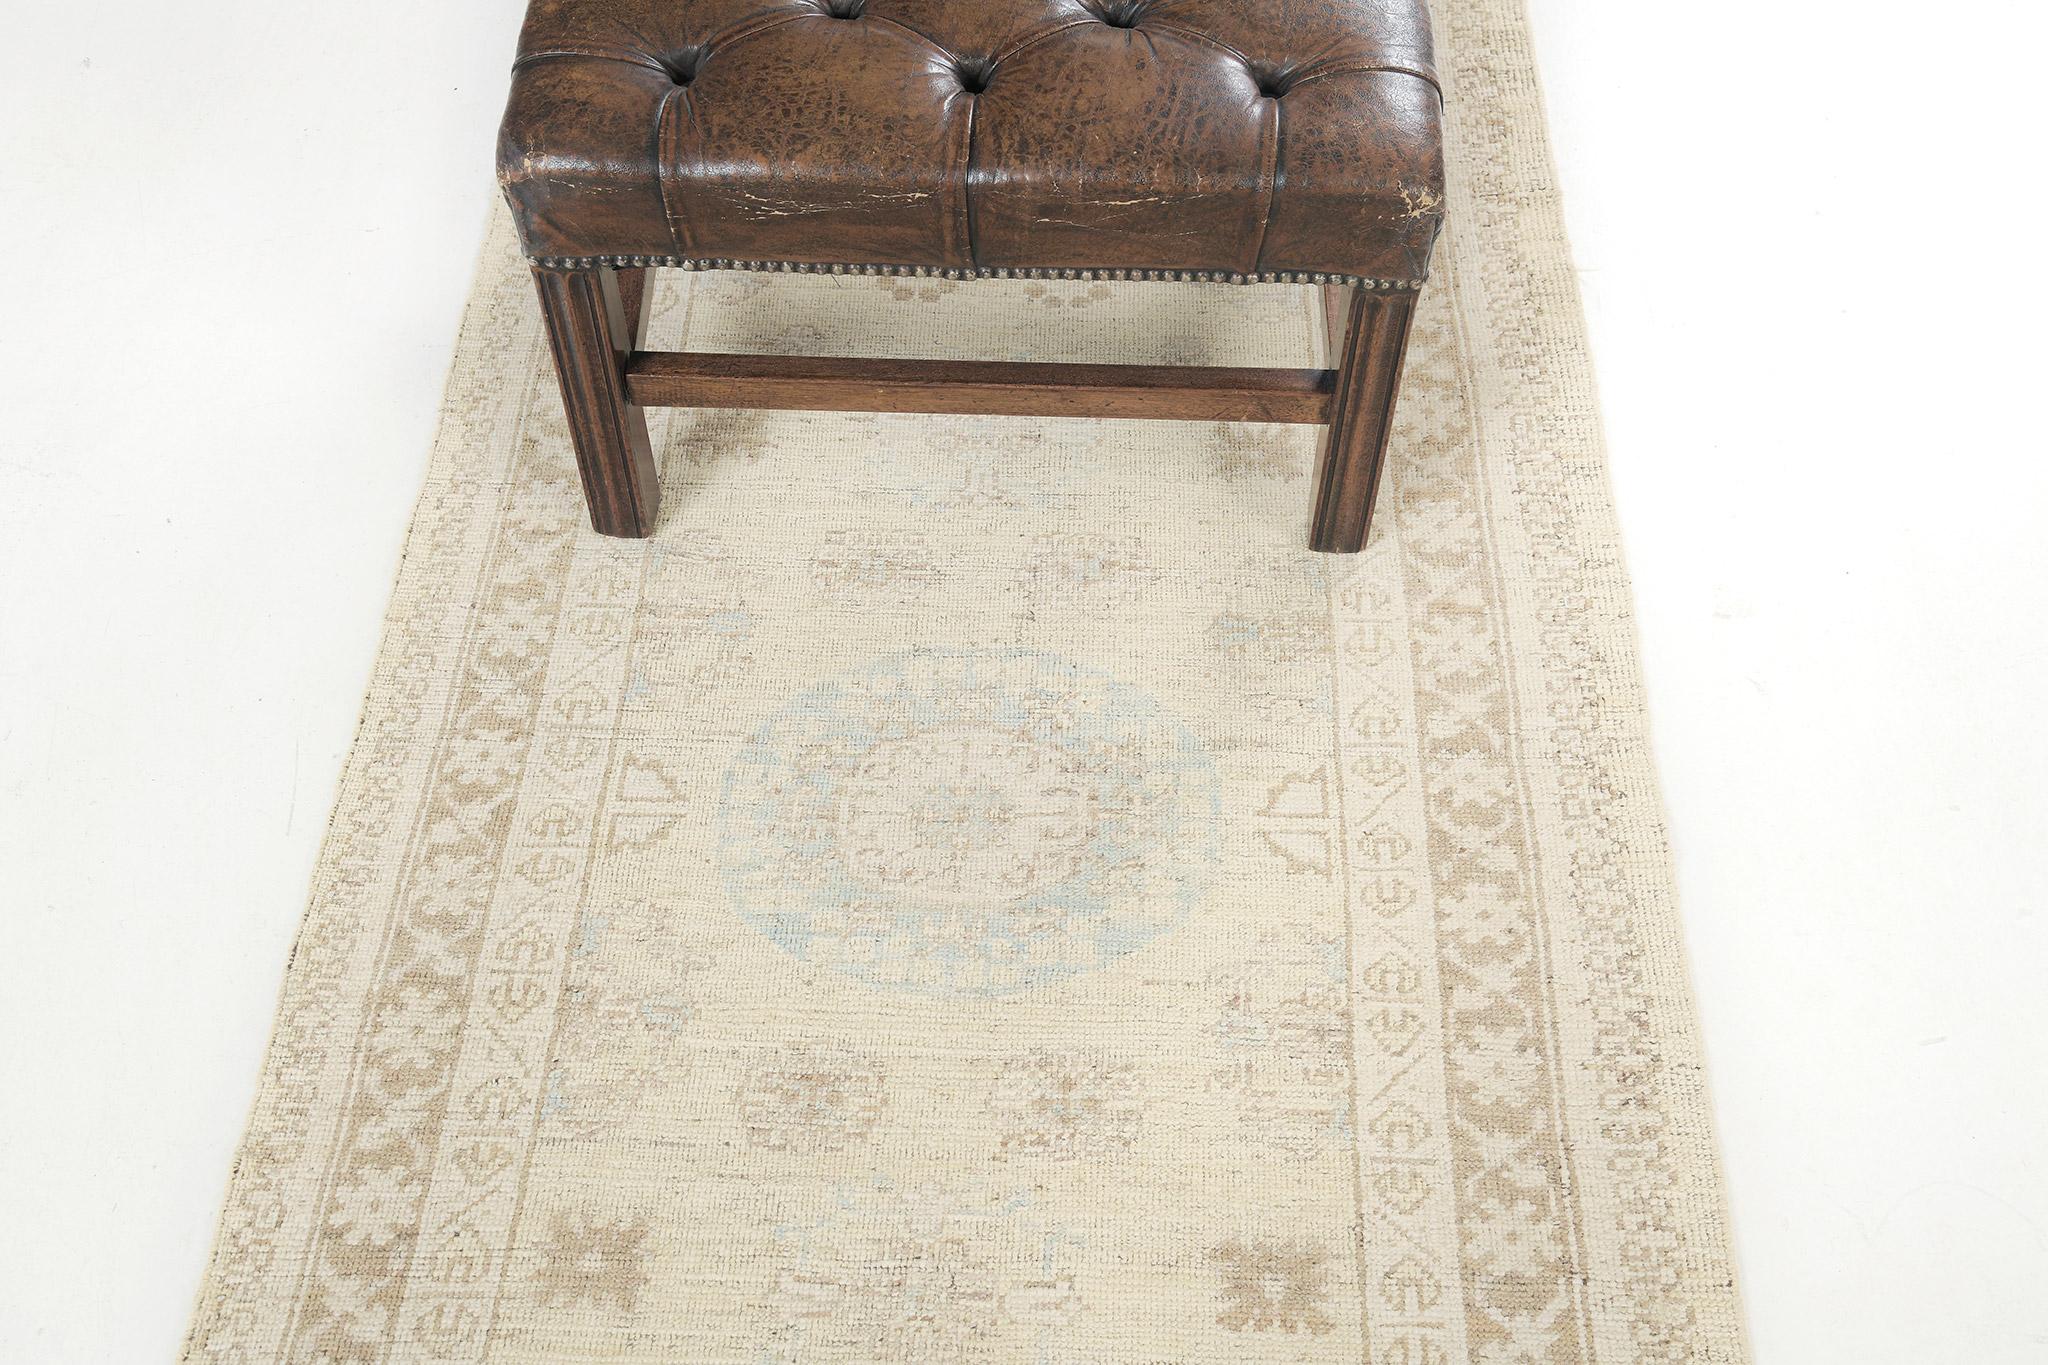 A stunning pile-woven wool Khotan design revival from our collection fits perfectly in your home.  Three geometric medallions and well-aligned motifs in neutral tones dominate the entire pattern of the runner. There are also gorgeous floral bands